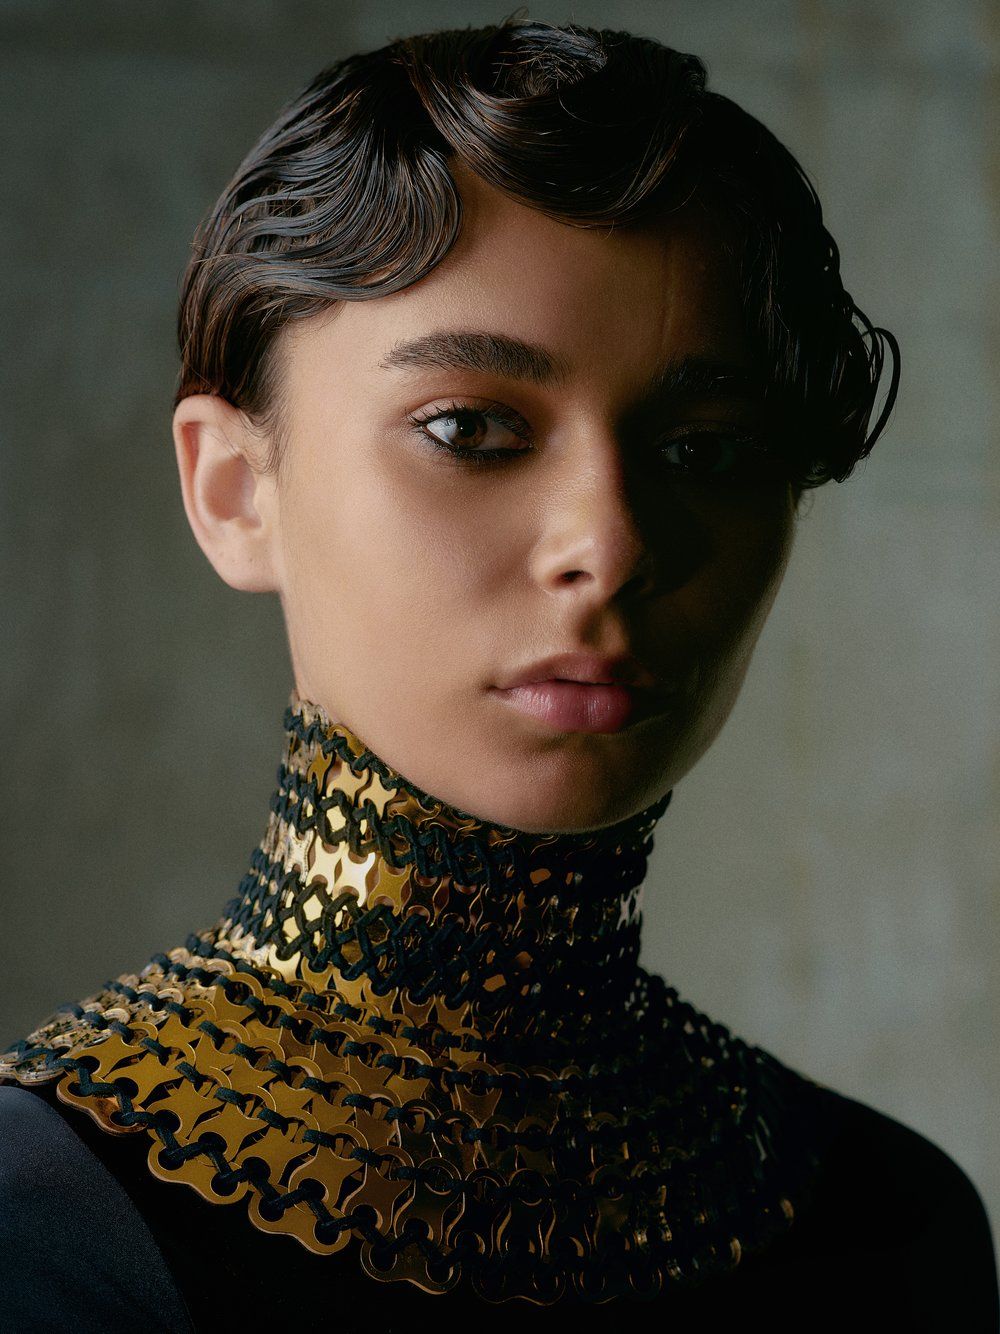 Model wearing a large gold neck piece made from bespoke cut pieces of sequin film and stitched together